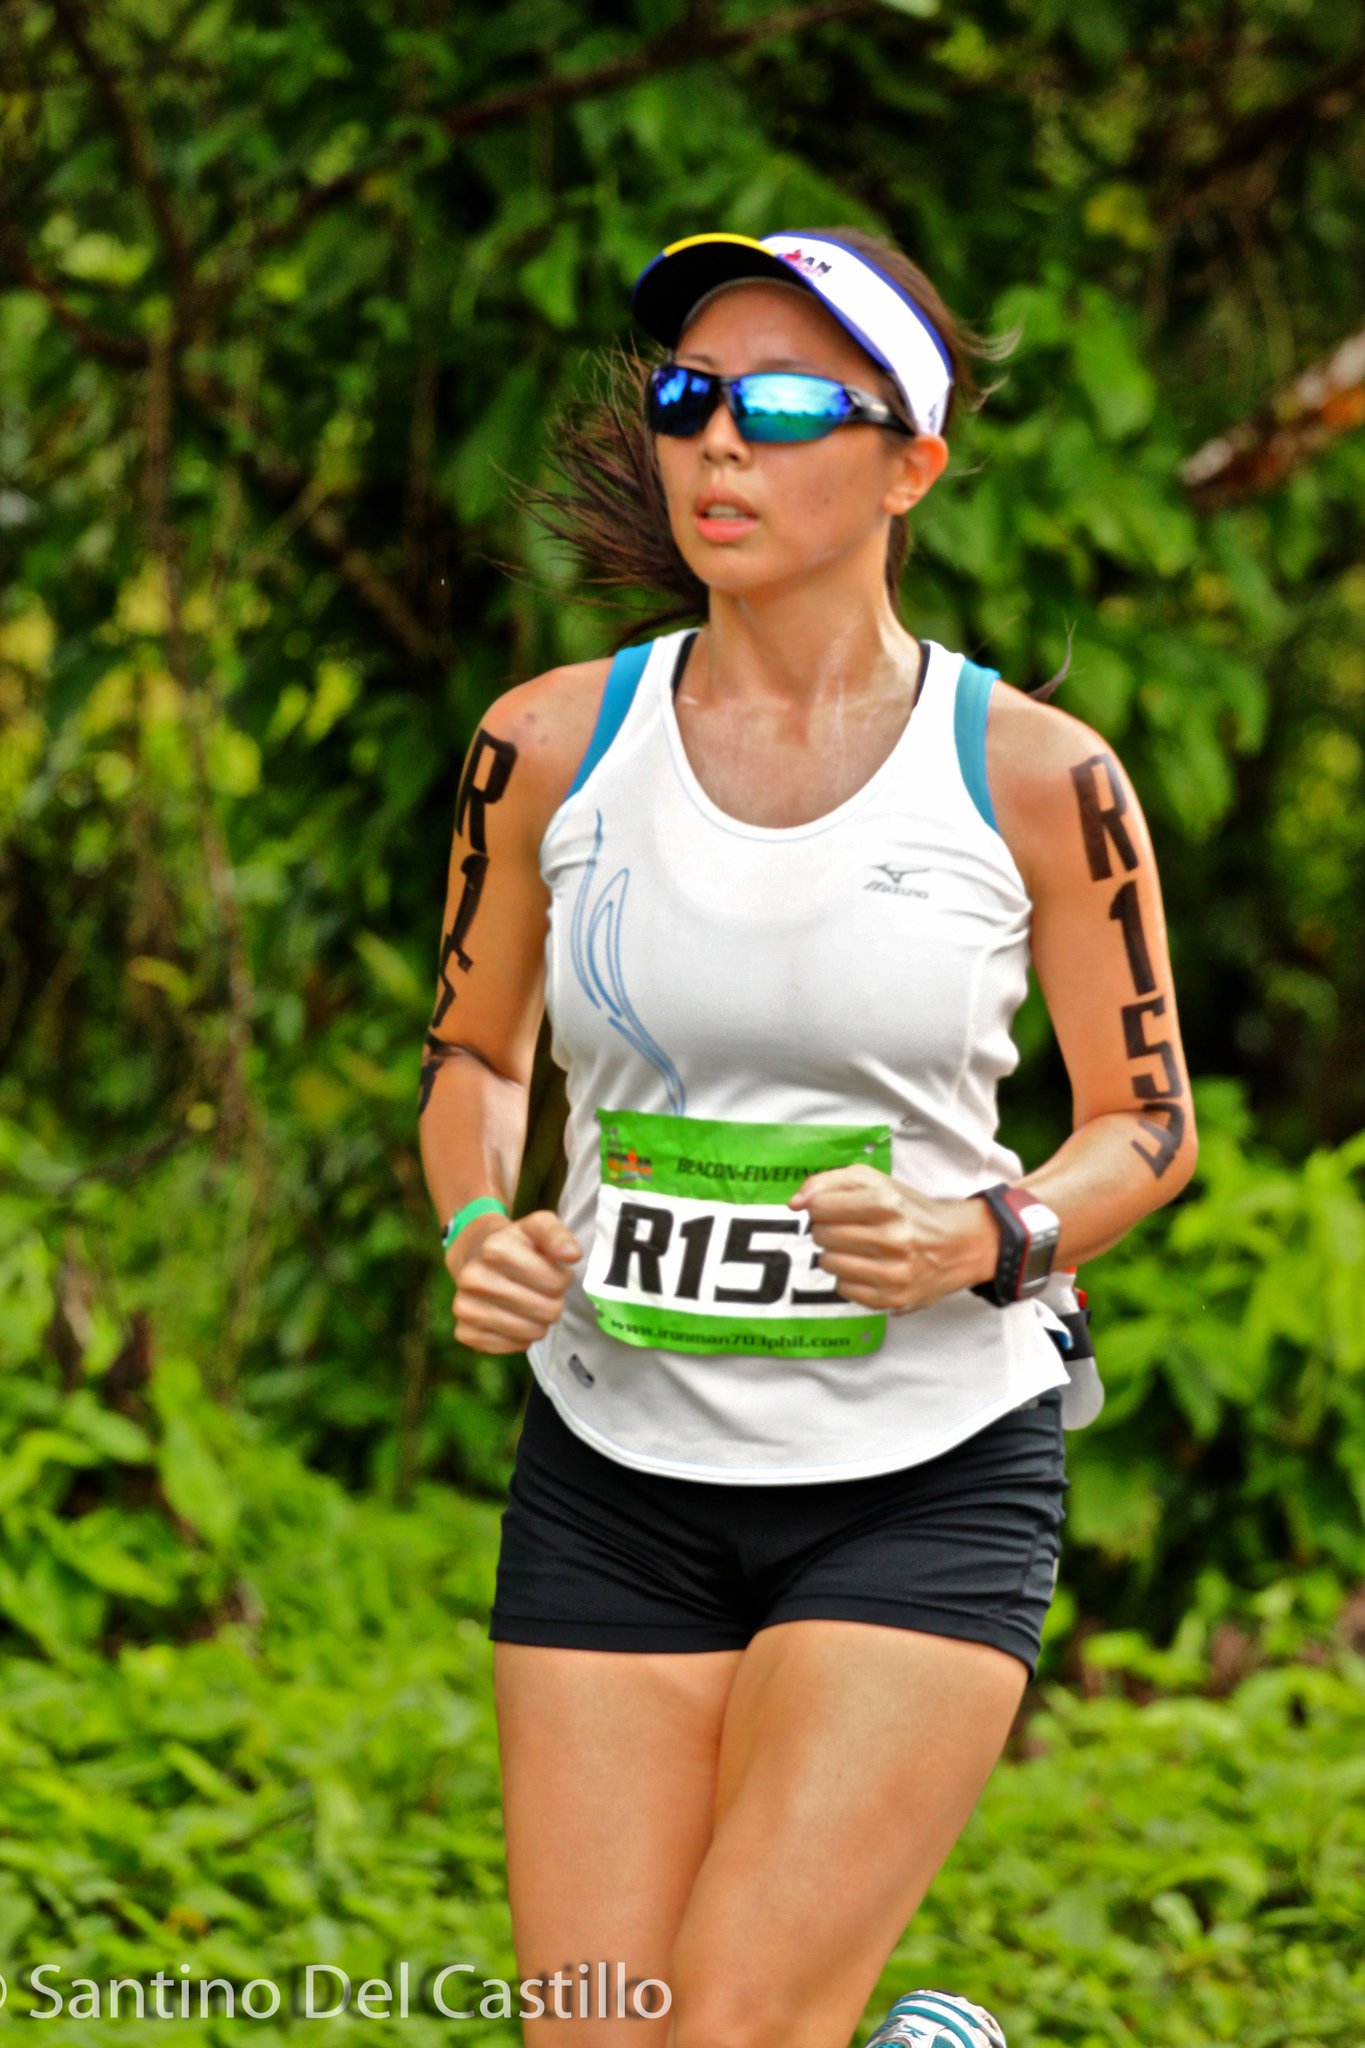 2011 Ironman 70.3: Ink-stained Run